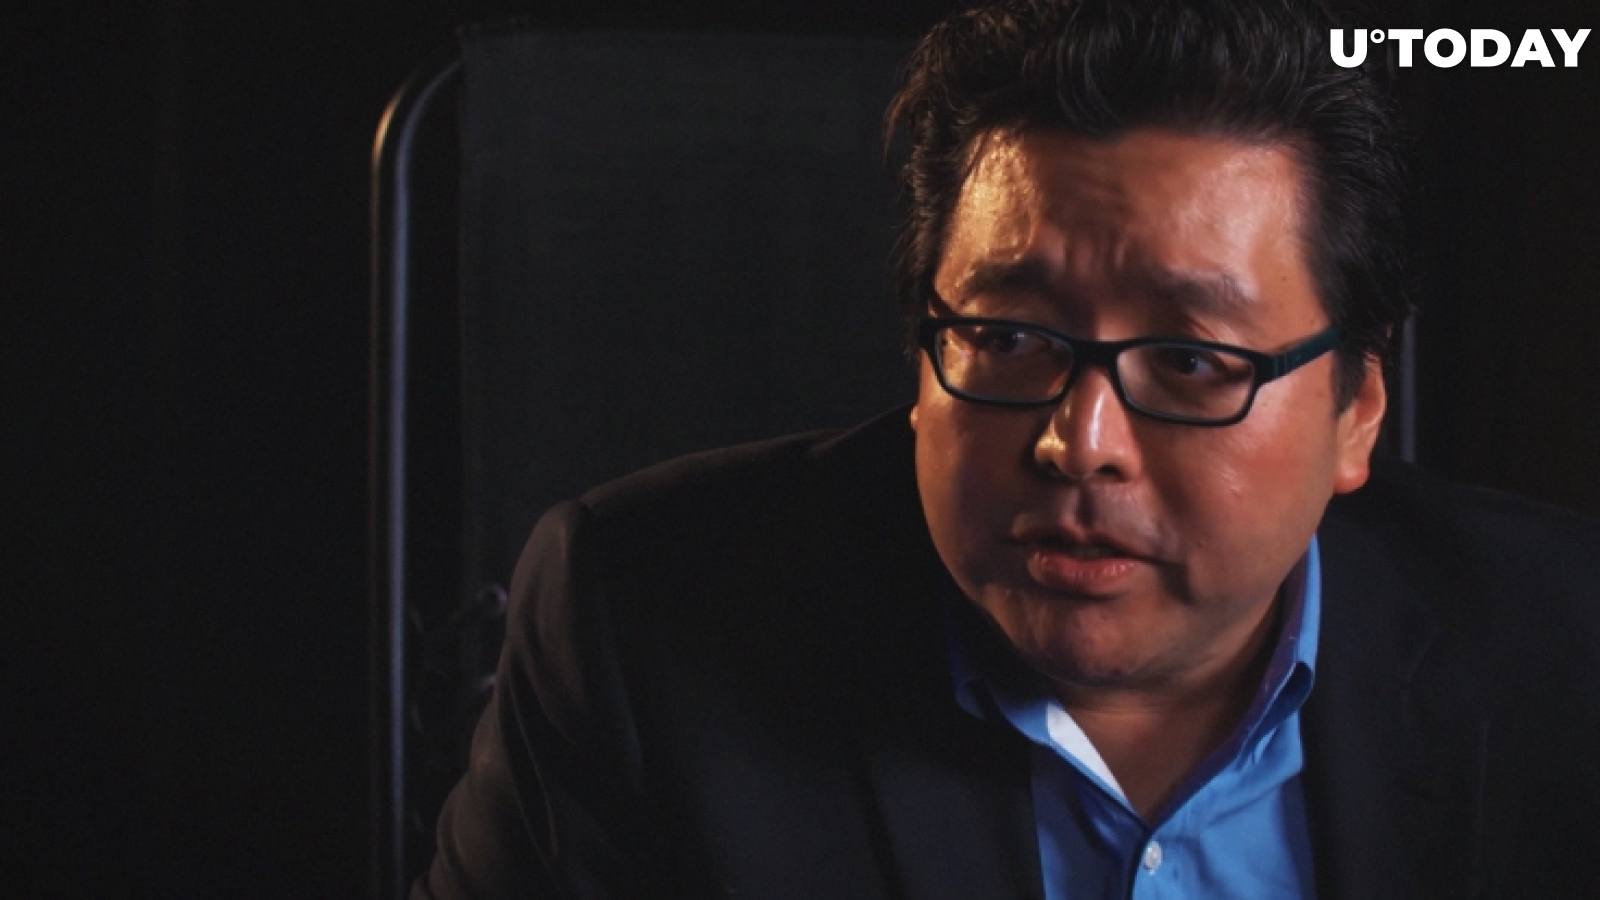 Tom Lee Insists 2020 Will Be Good for Bitcoin (BTC) Despite Recent Pullback